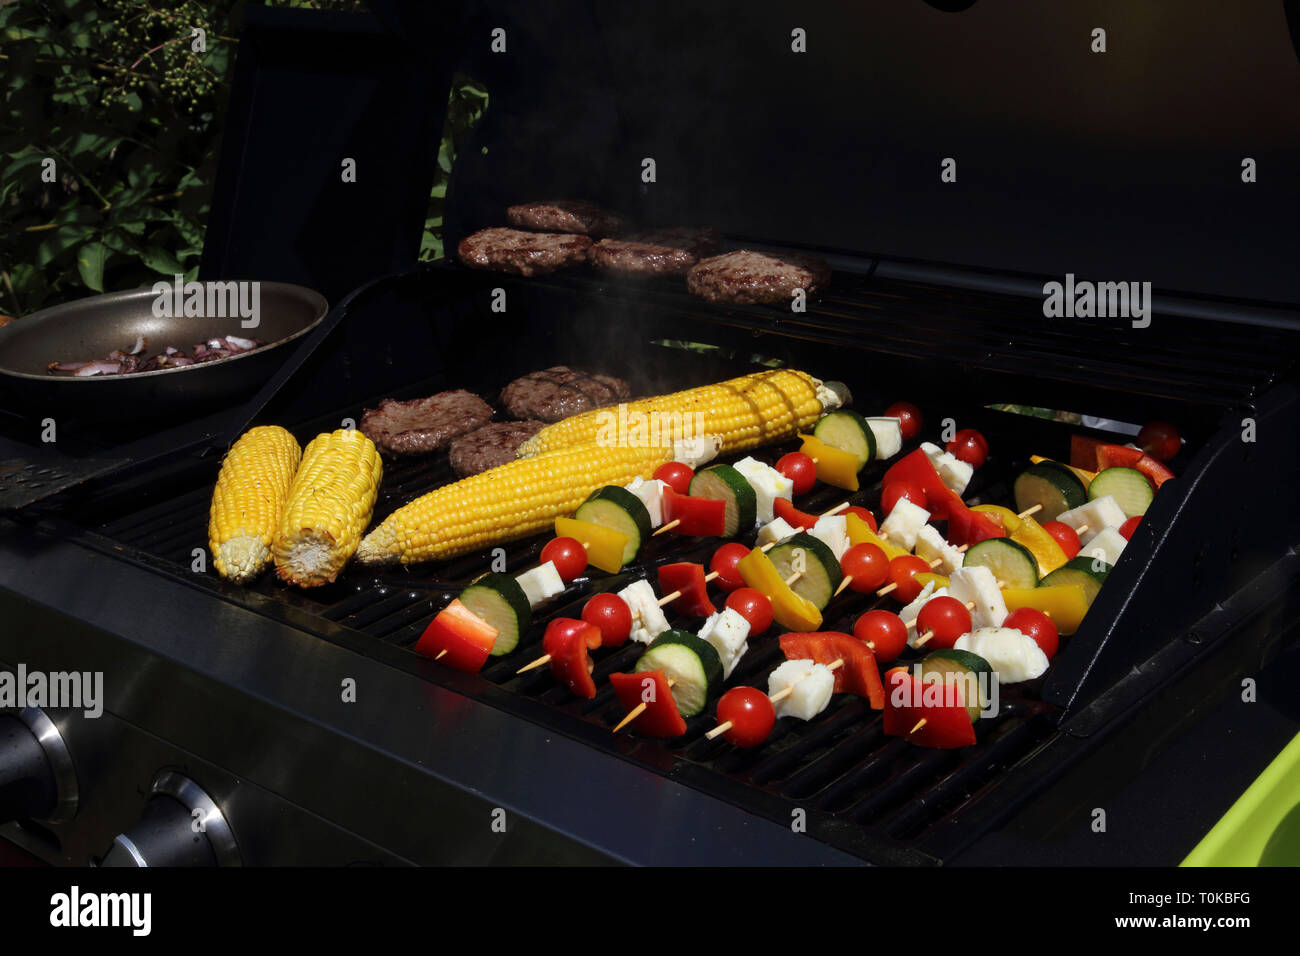 Cooking Kebabs, Corn on the Cob and Burgers on Barbeque in Garden Gillingham Dorset England Stock Photo